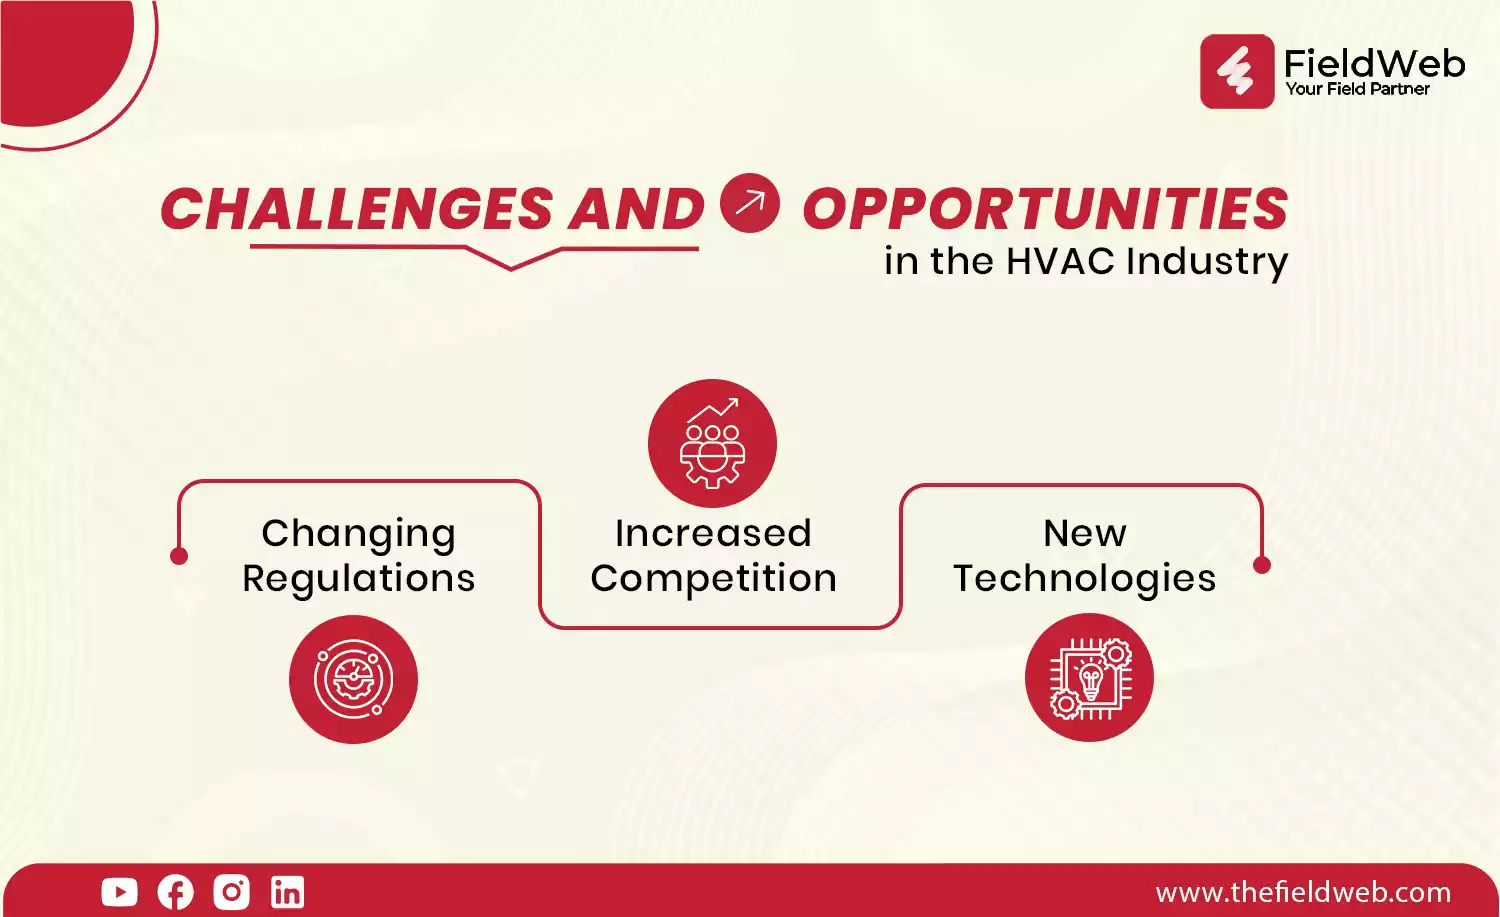 image is displaying challenges and opportunities in the hvac industry